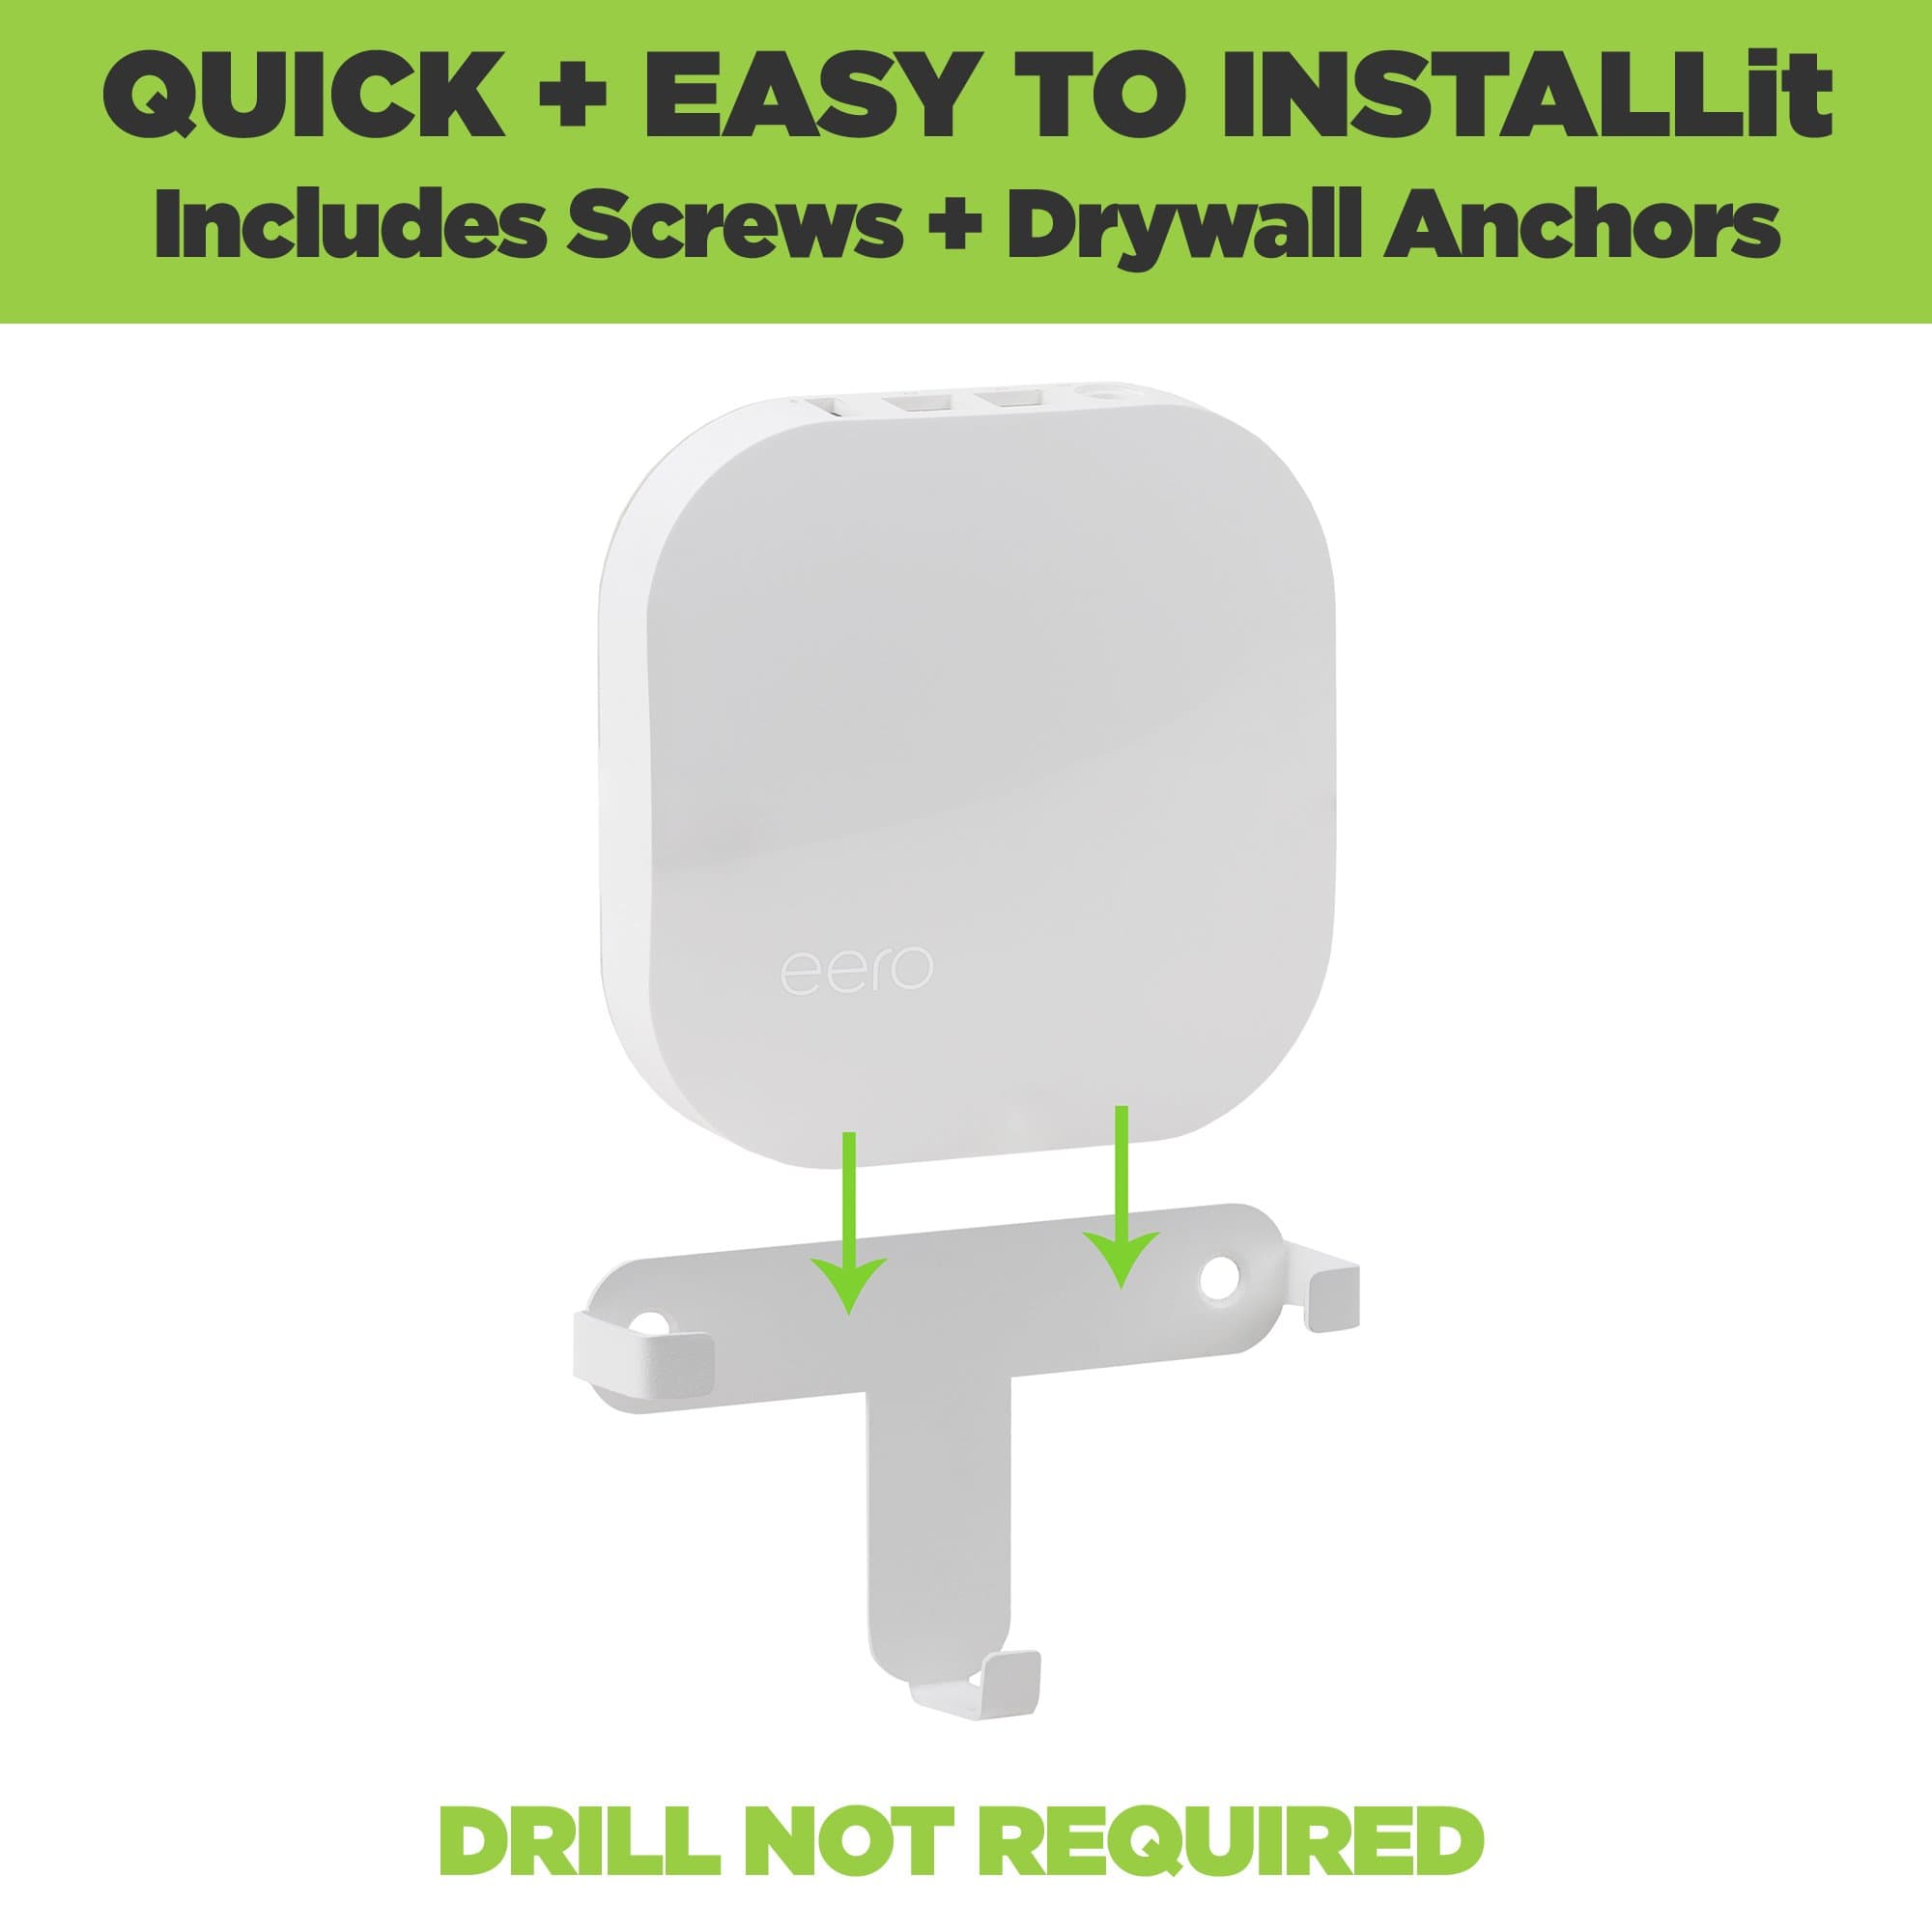 The HIDEit Eero Pro Wall Mount is easy to install. Drill not required.